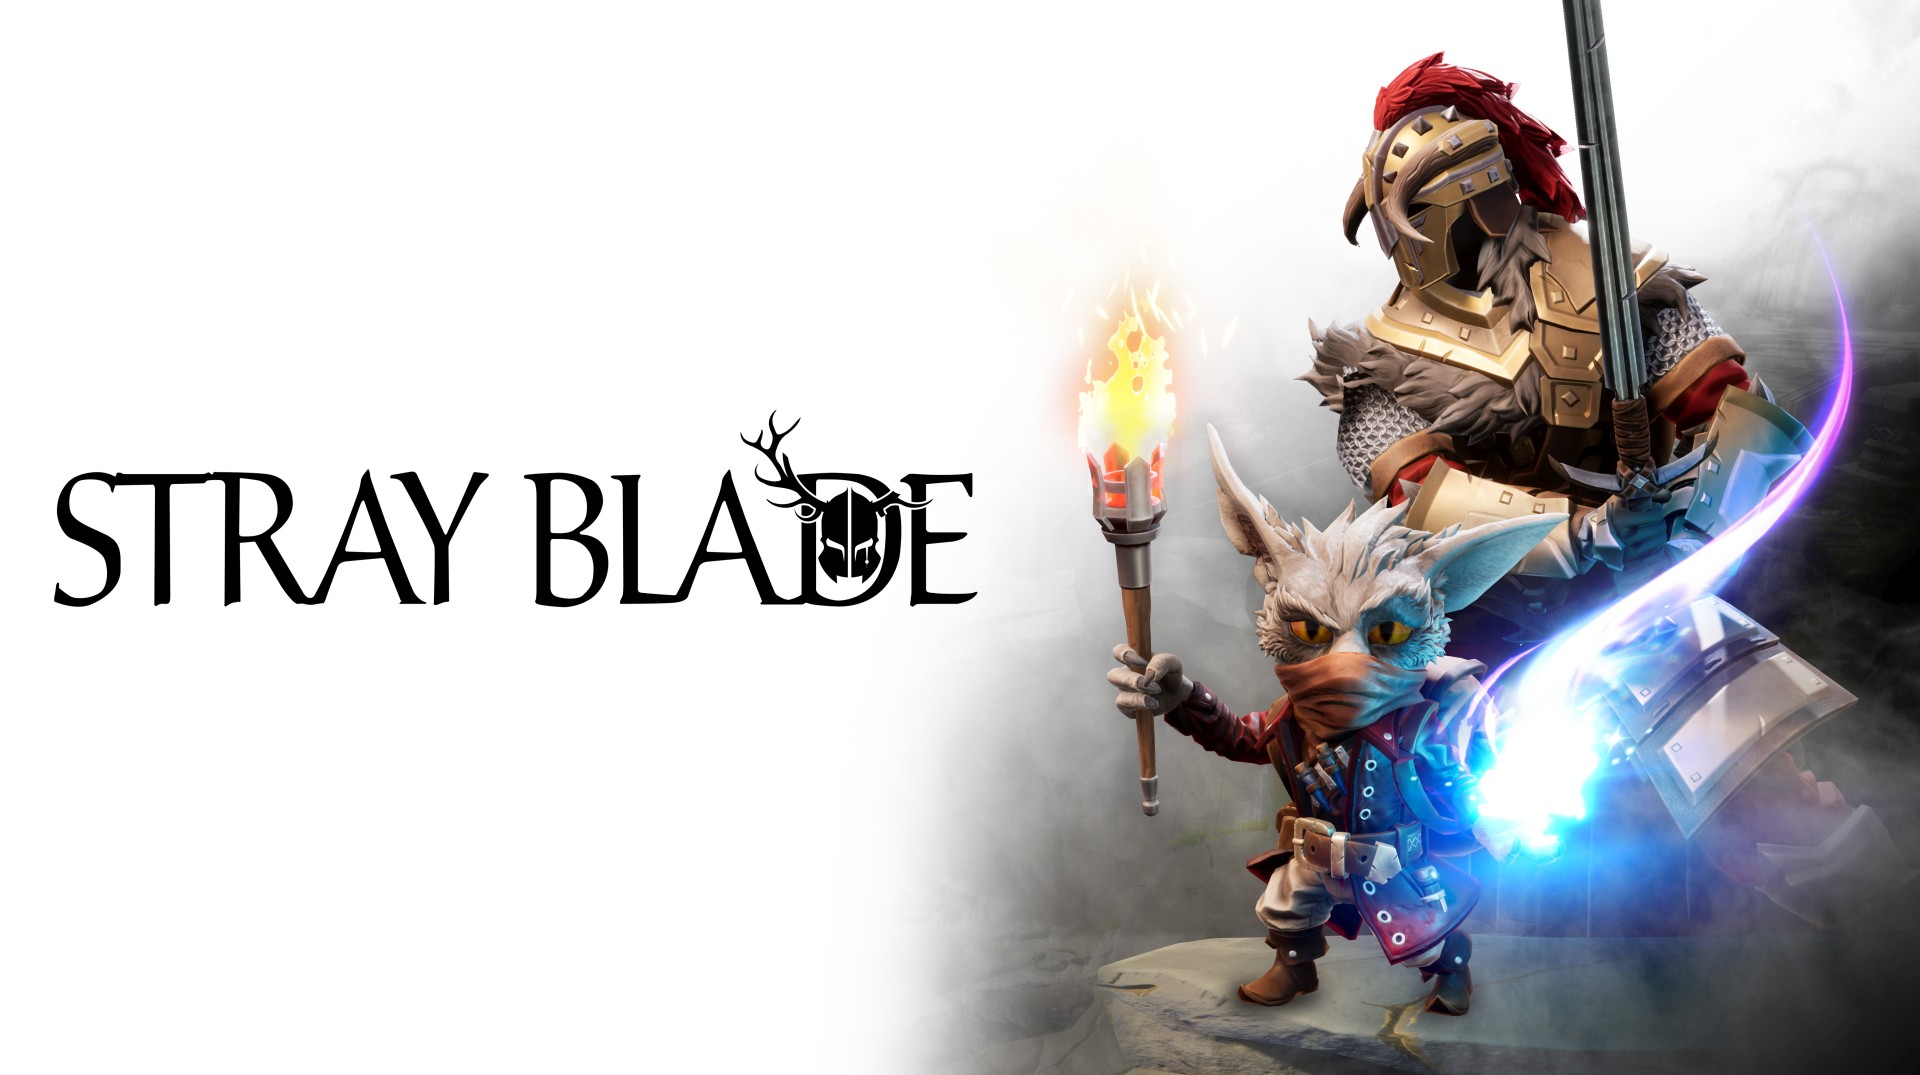 Video For gamescom 2021: Stray Blade Coming to Xbox Series X|S Next Year